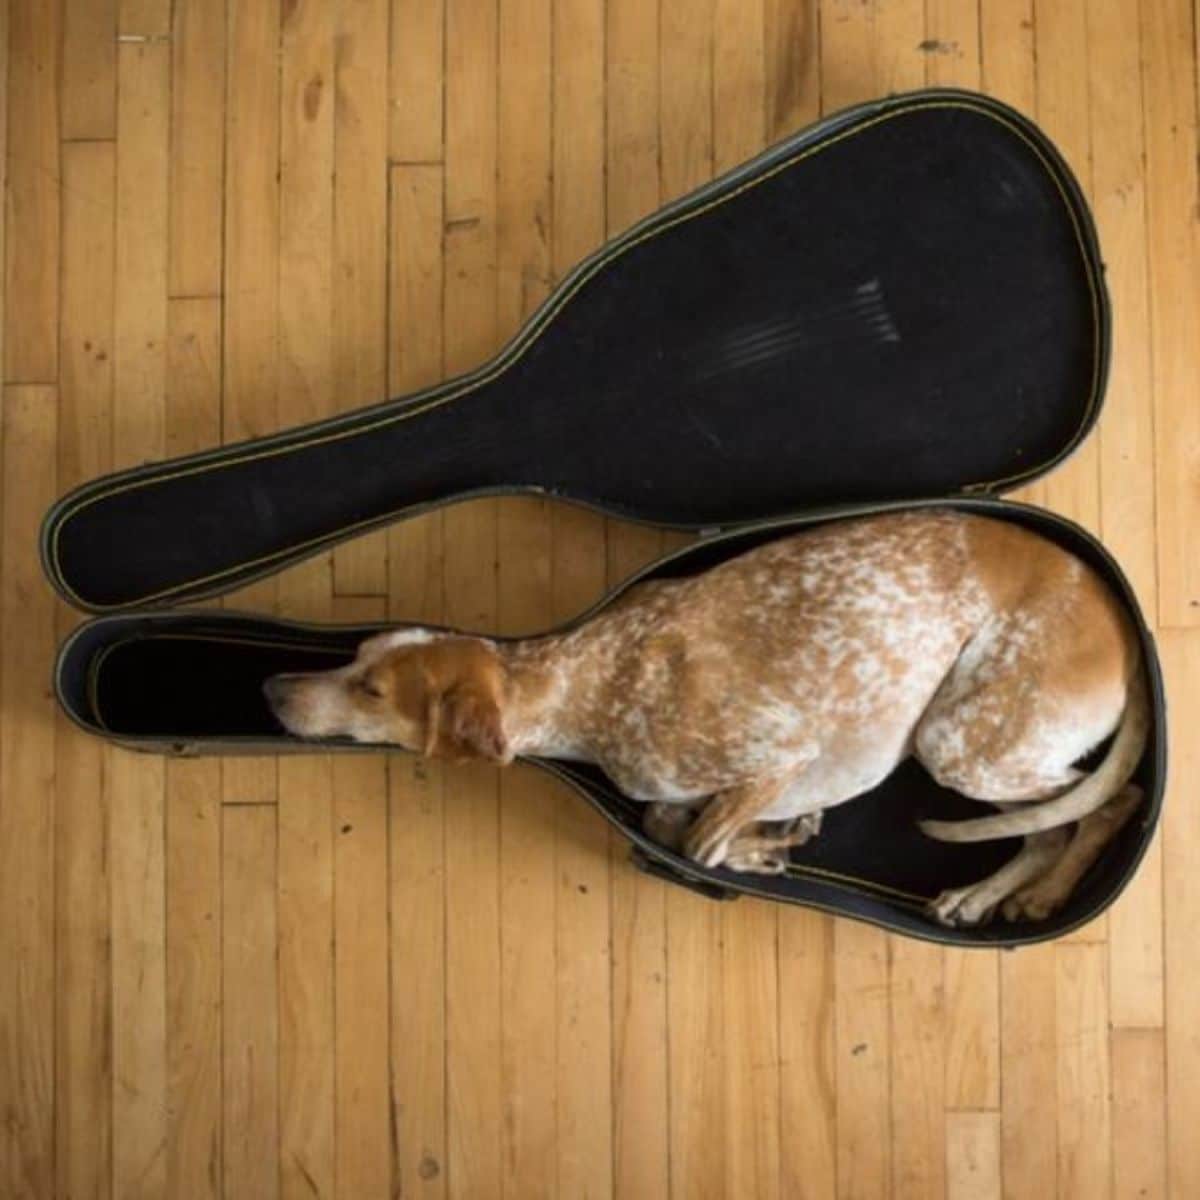 brown and white large dog laying inside a black guitar case